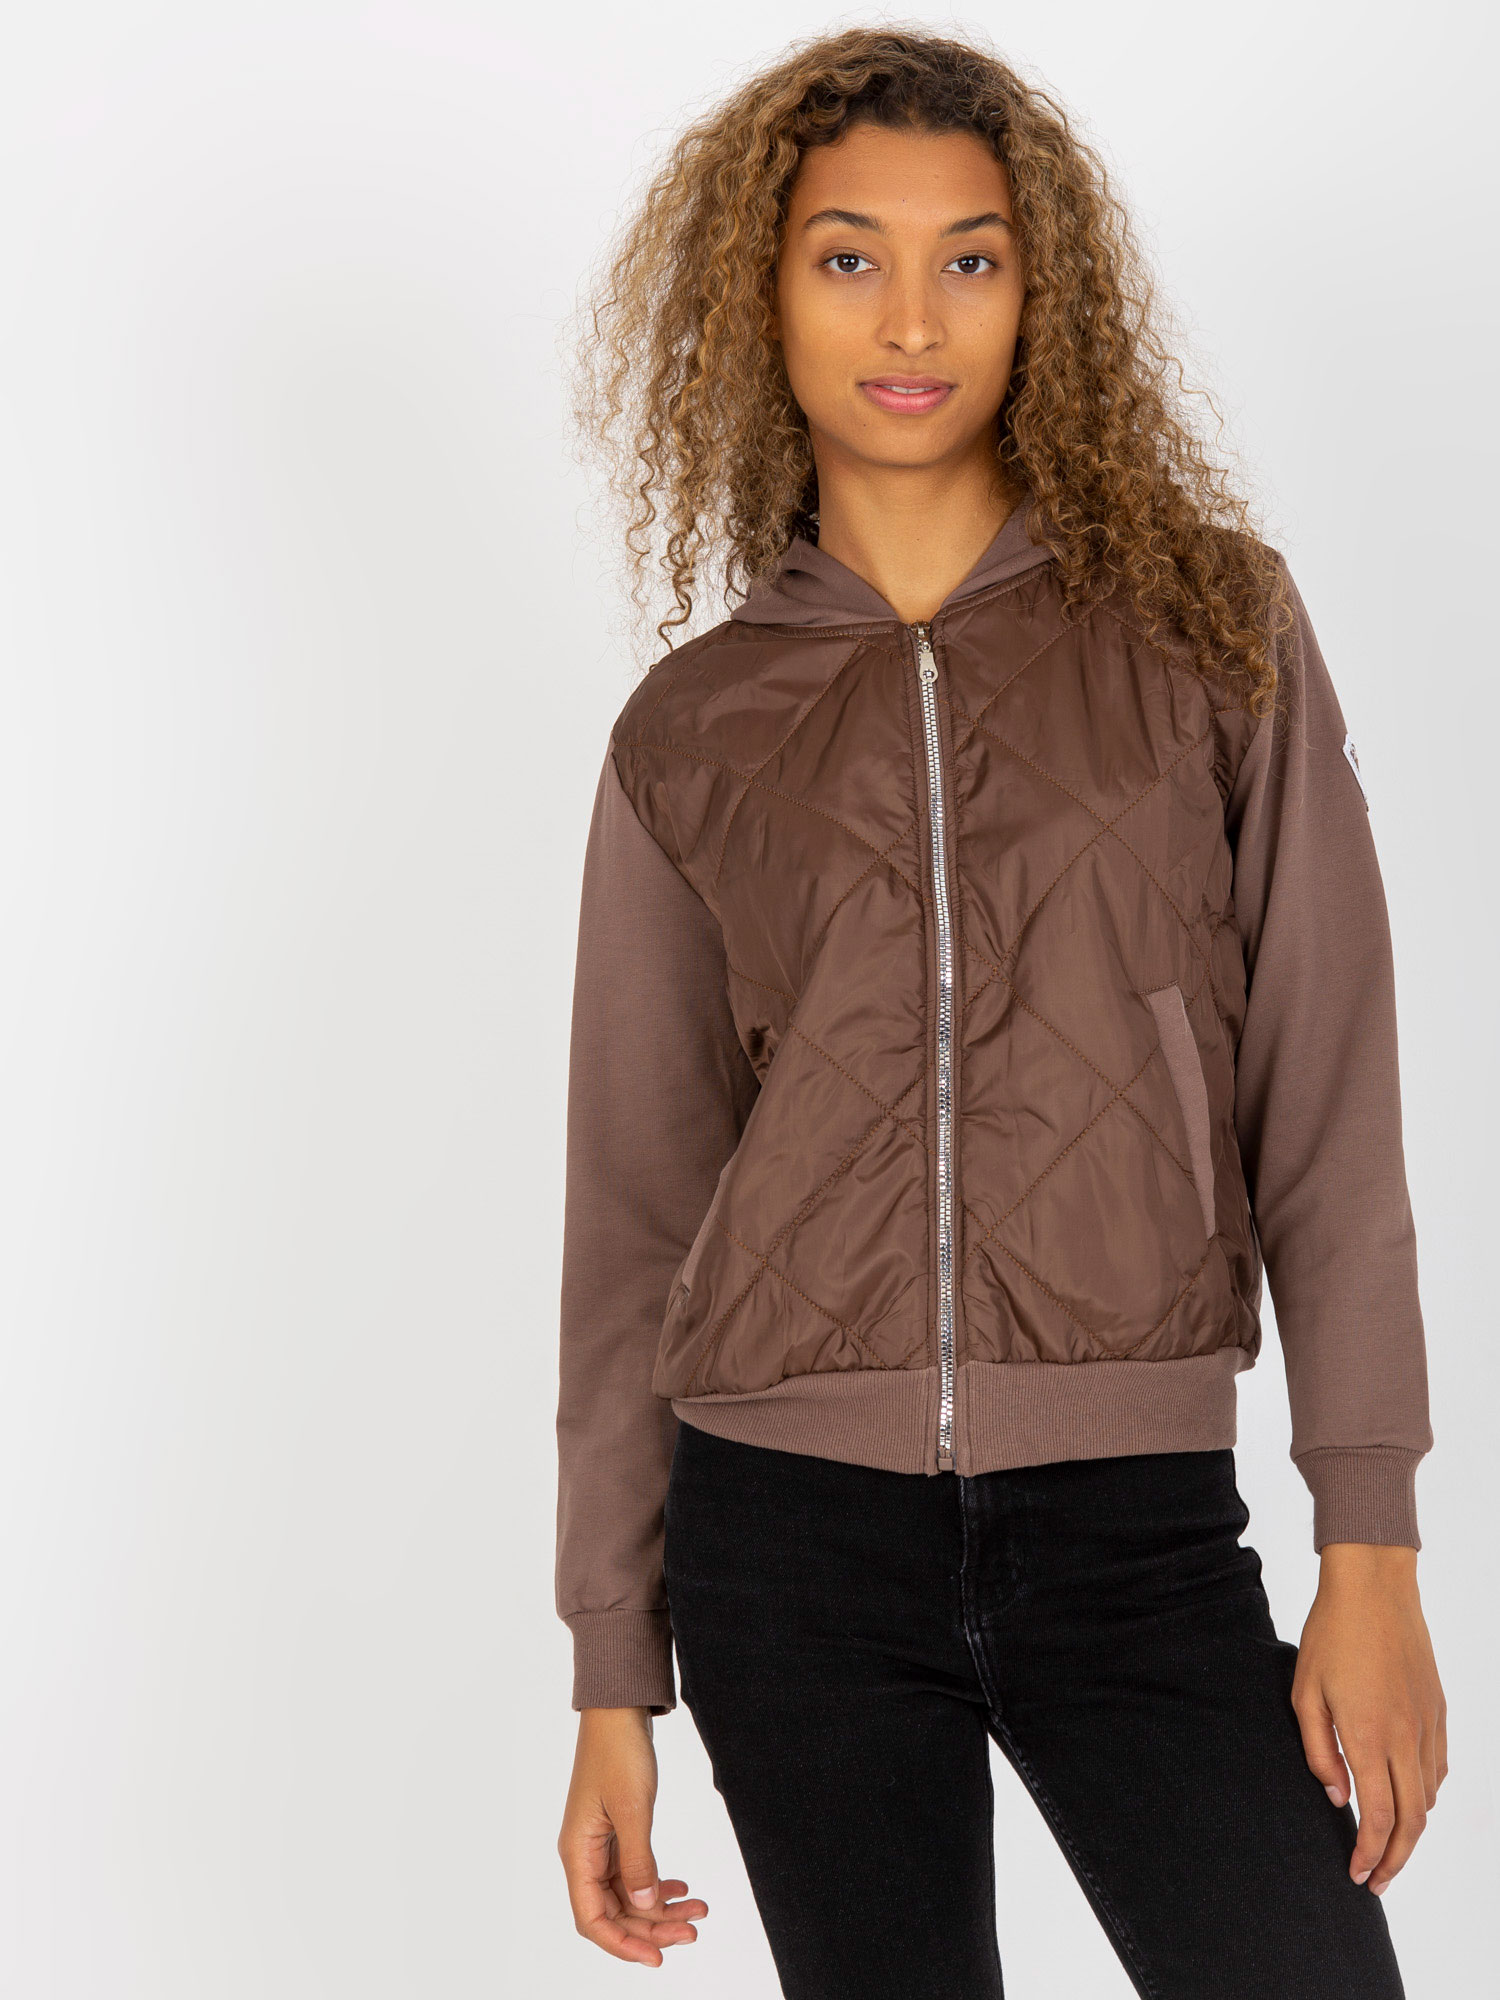 Brown quilted bomber sweatshirt RUE PARIS with pockets